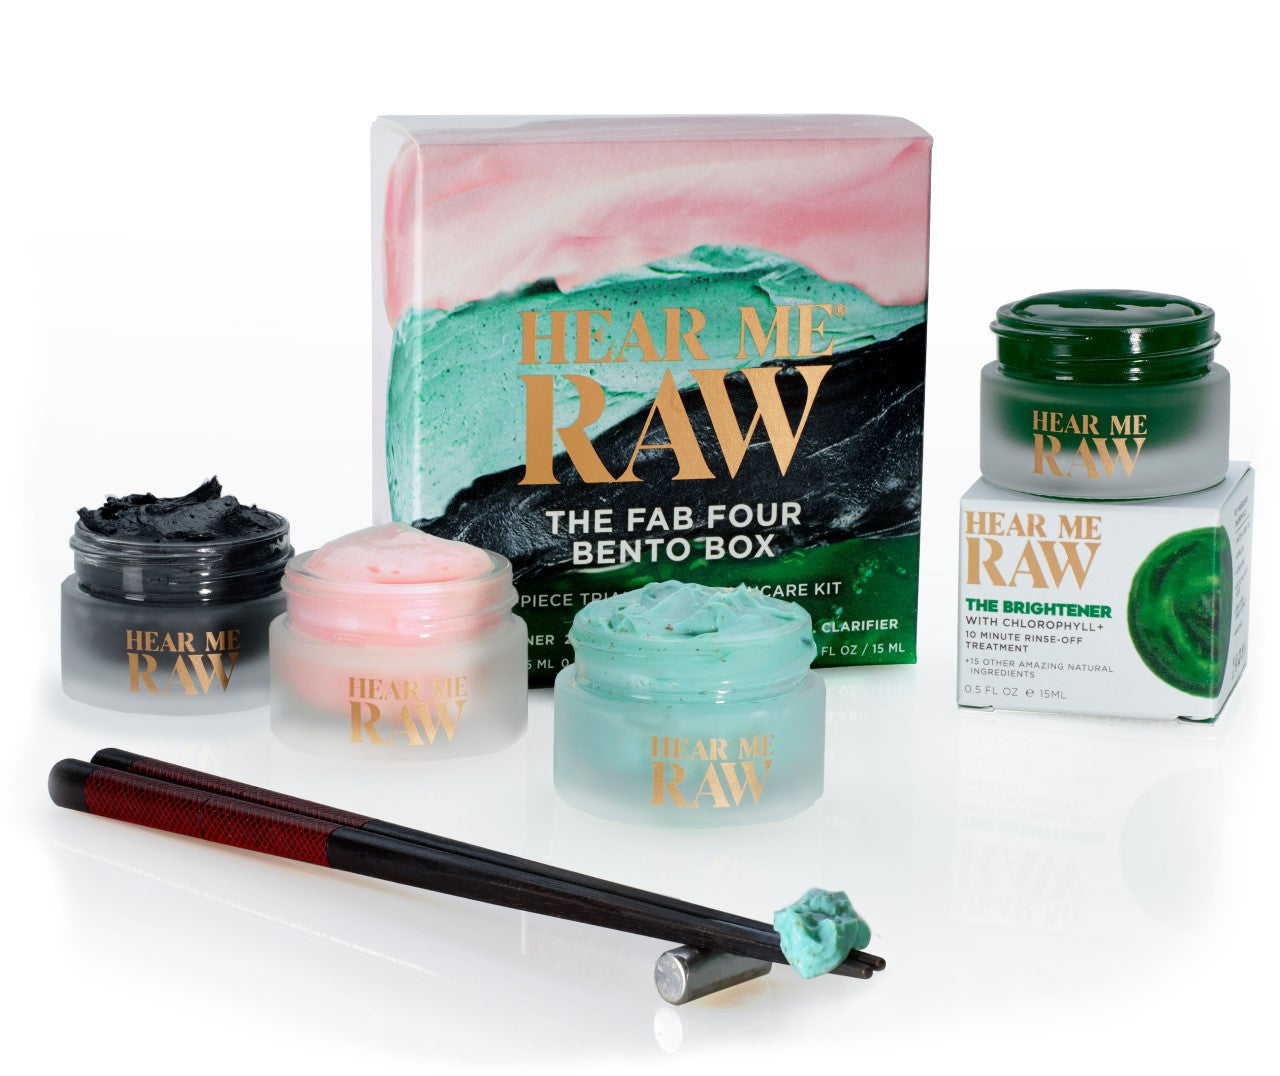 Hear Me Raw's The Fab Four Bento Box - perfect for travel